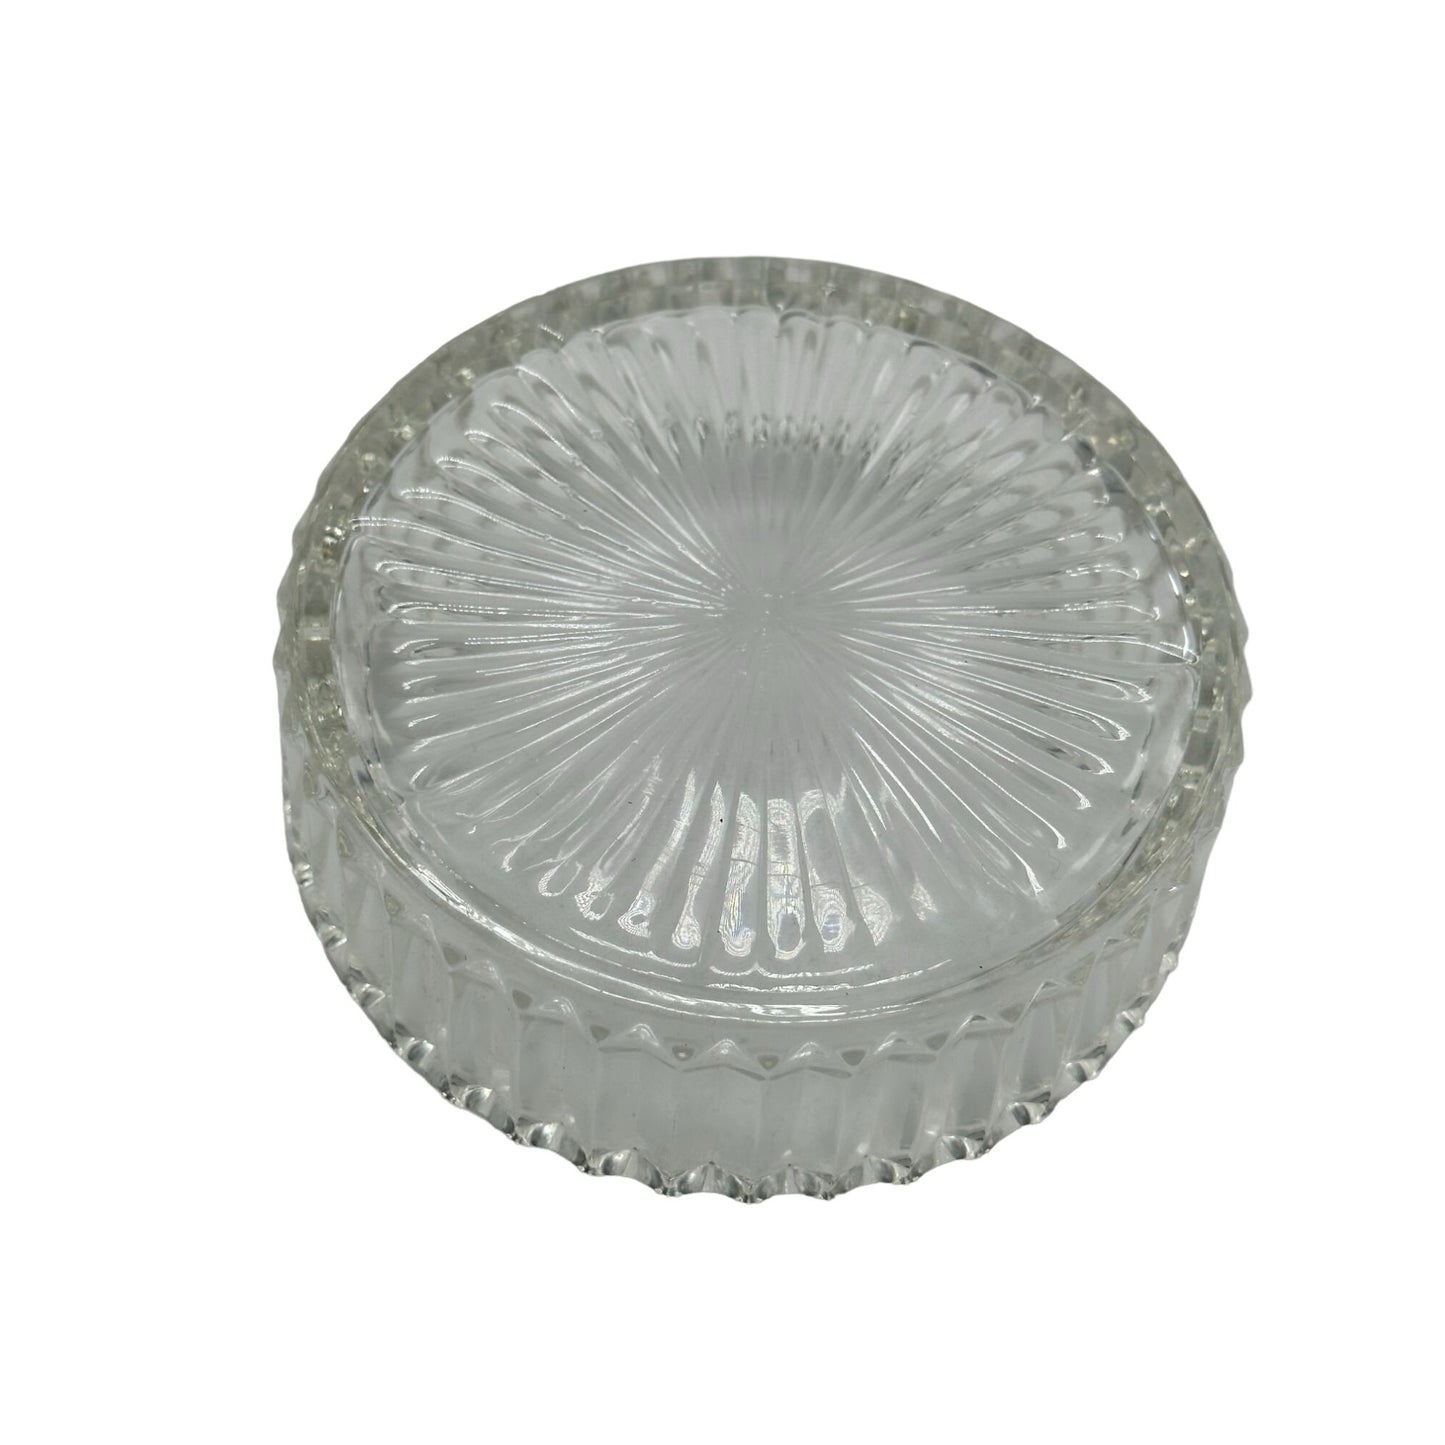 Vintage Sawtooth Rim Clear Glass Candy Dish Ribbed Sides Collectible Rare Find